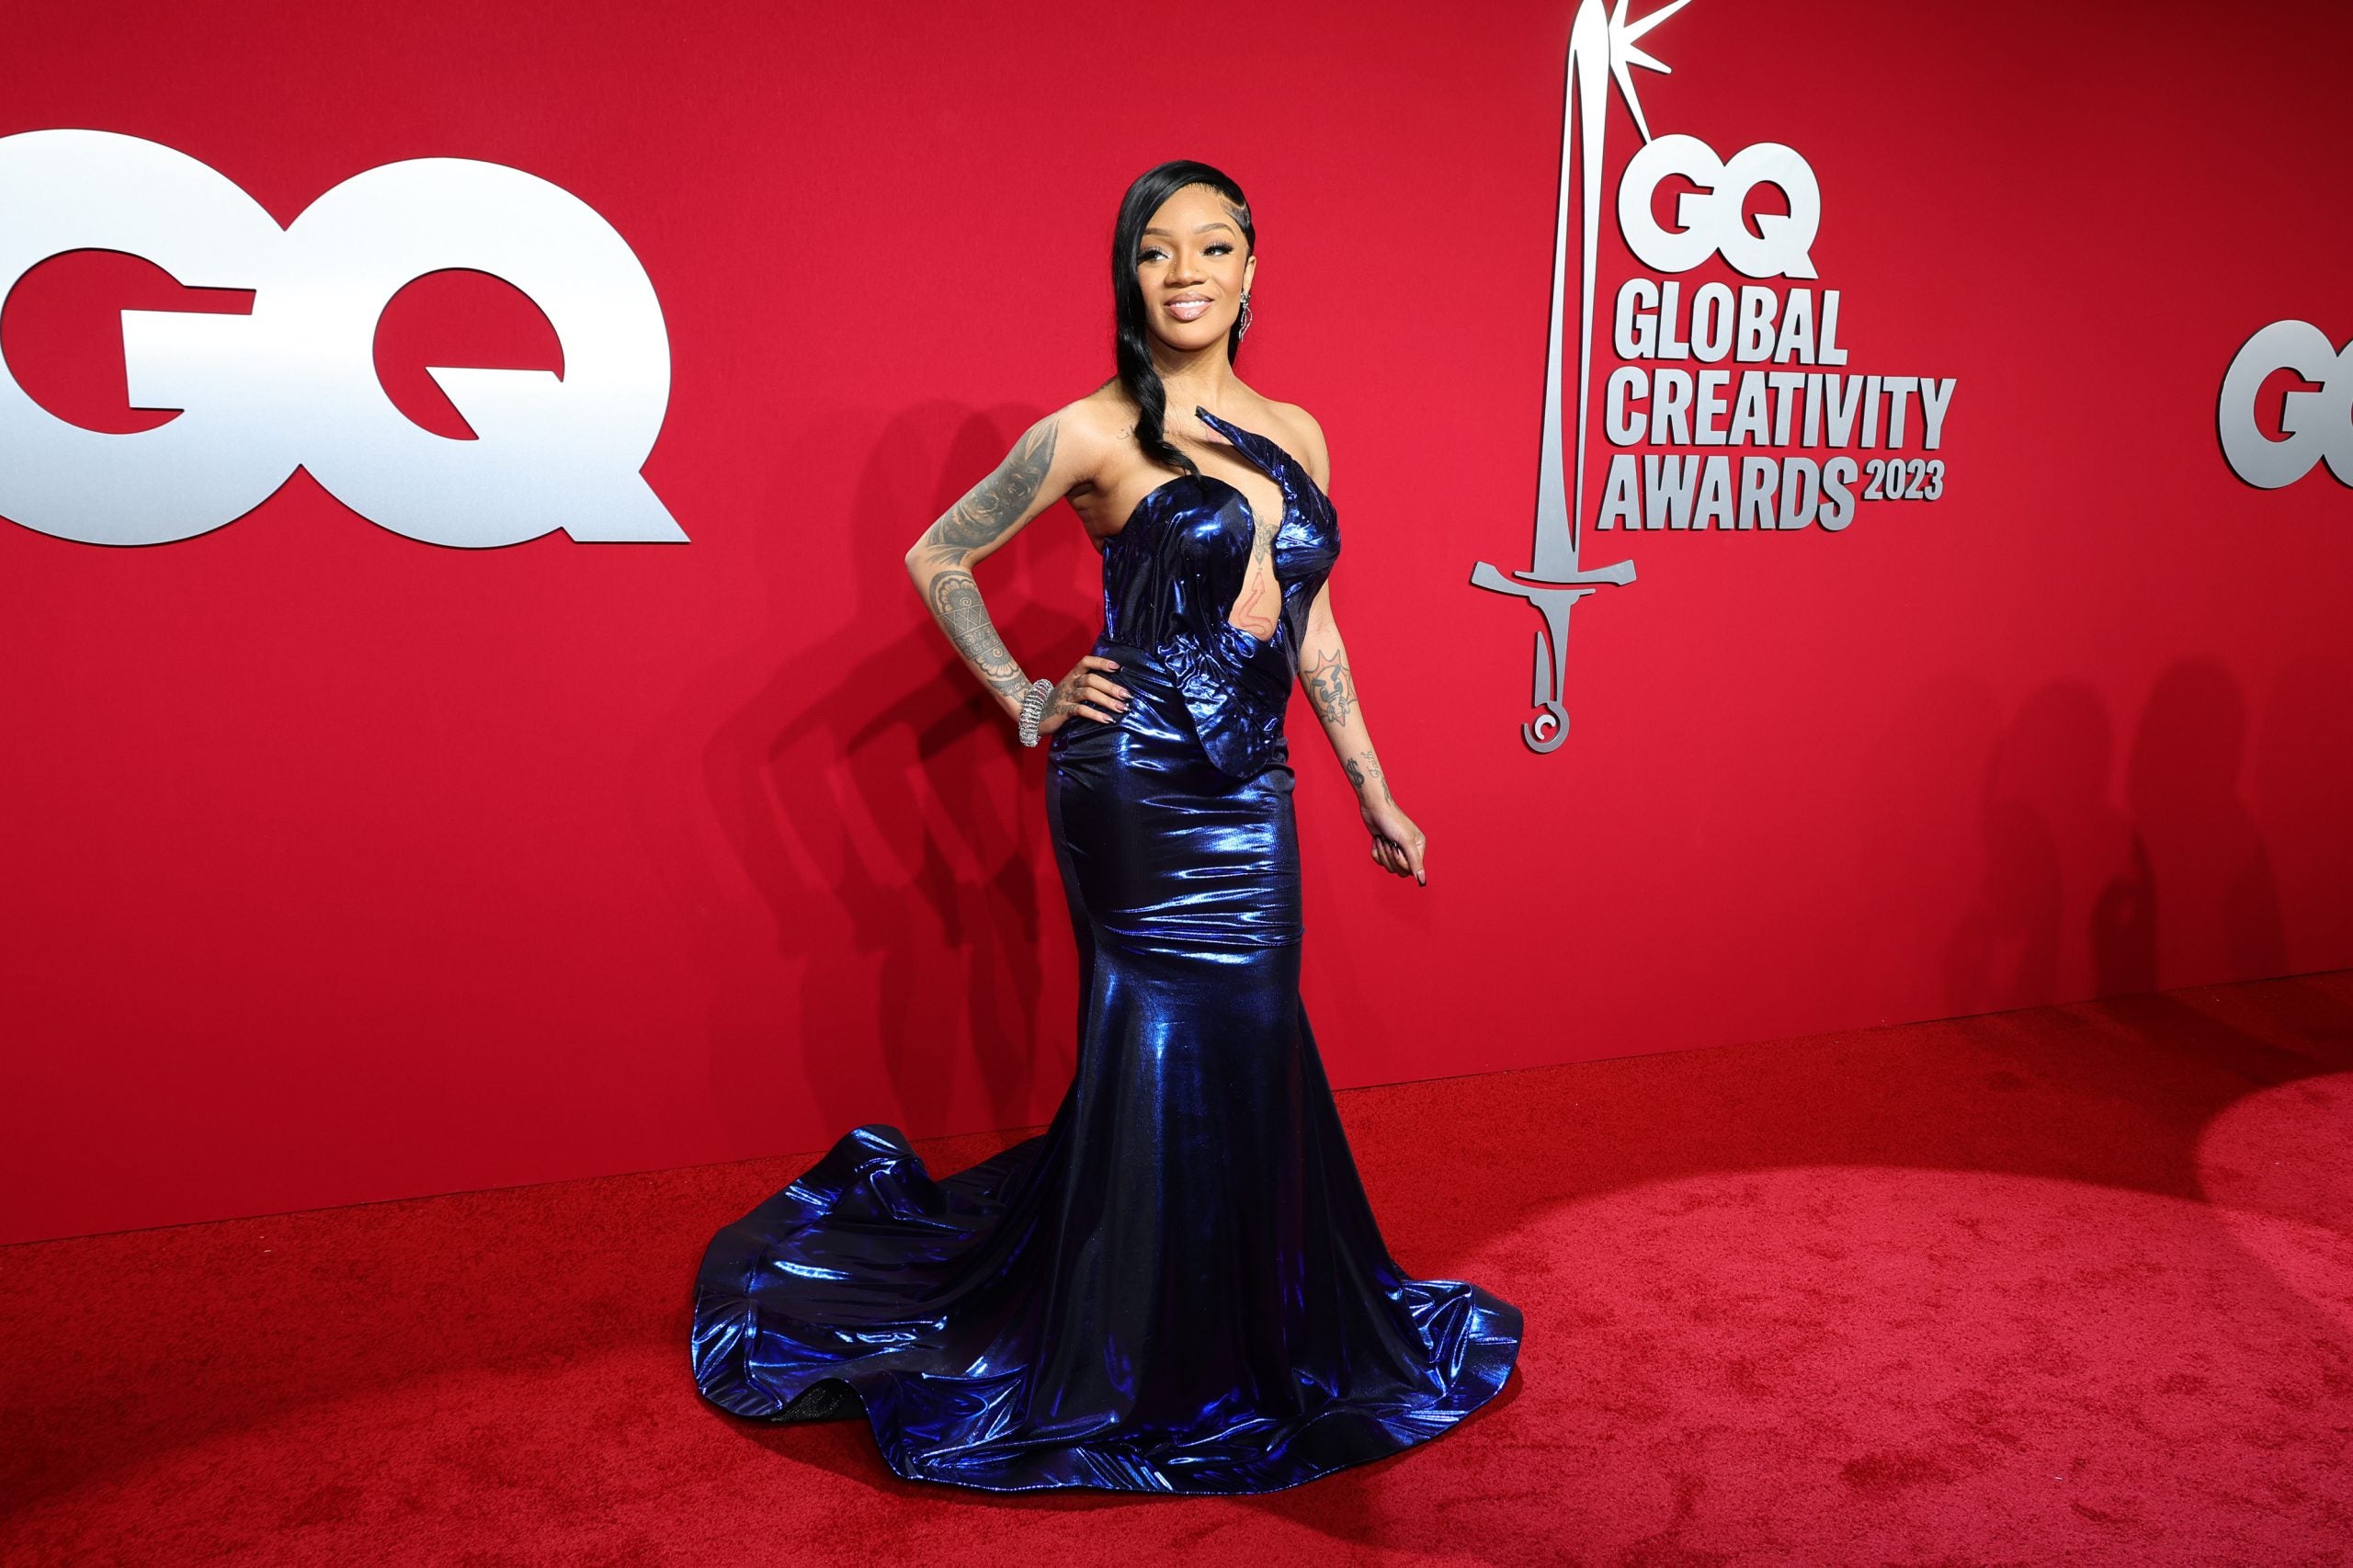 Star Gazing: GQ's Global Creativity Awards, 'Praise This' Premiere, And More